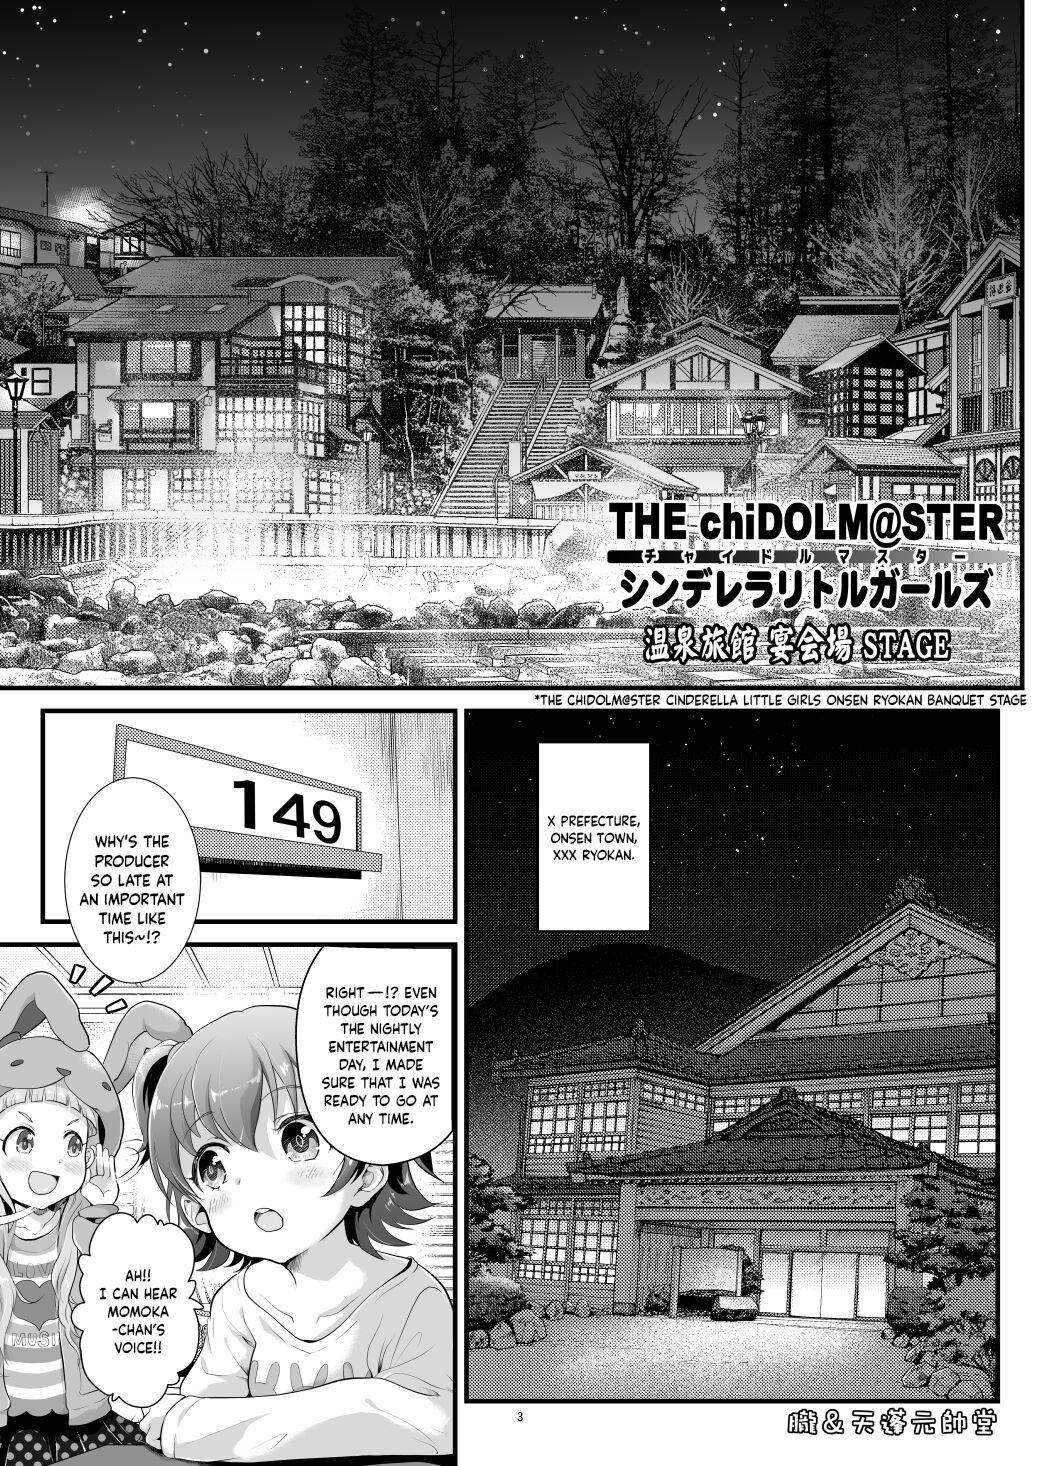 Student THE chiDOLM@STER Cinderella Little Girls - The idolmaster Italian - Page 2